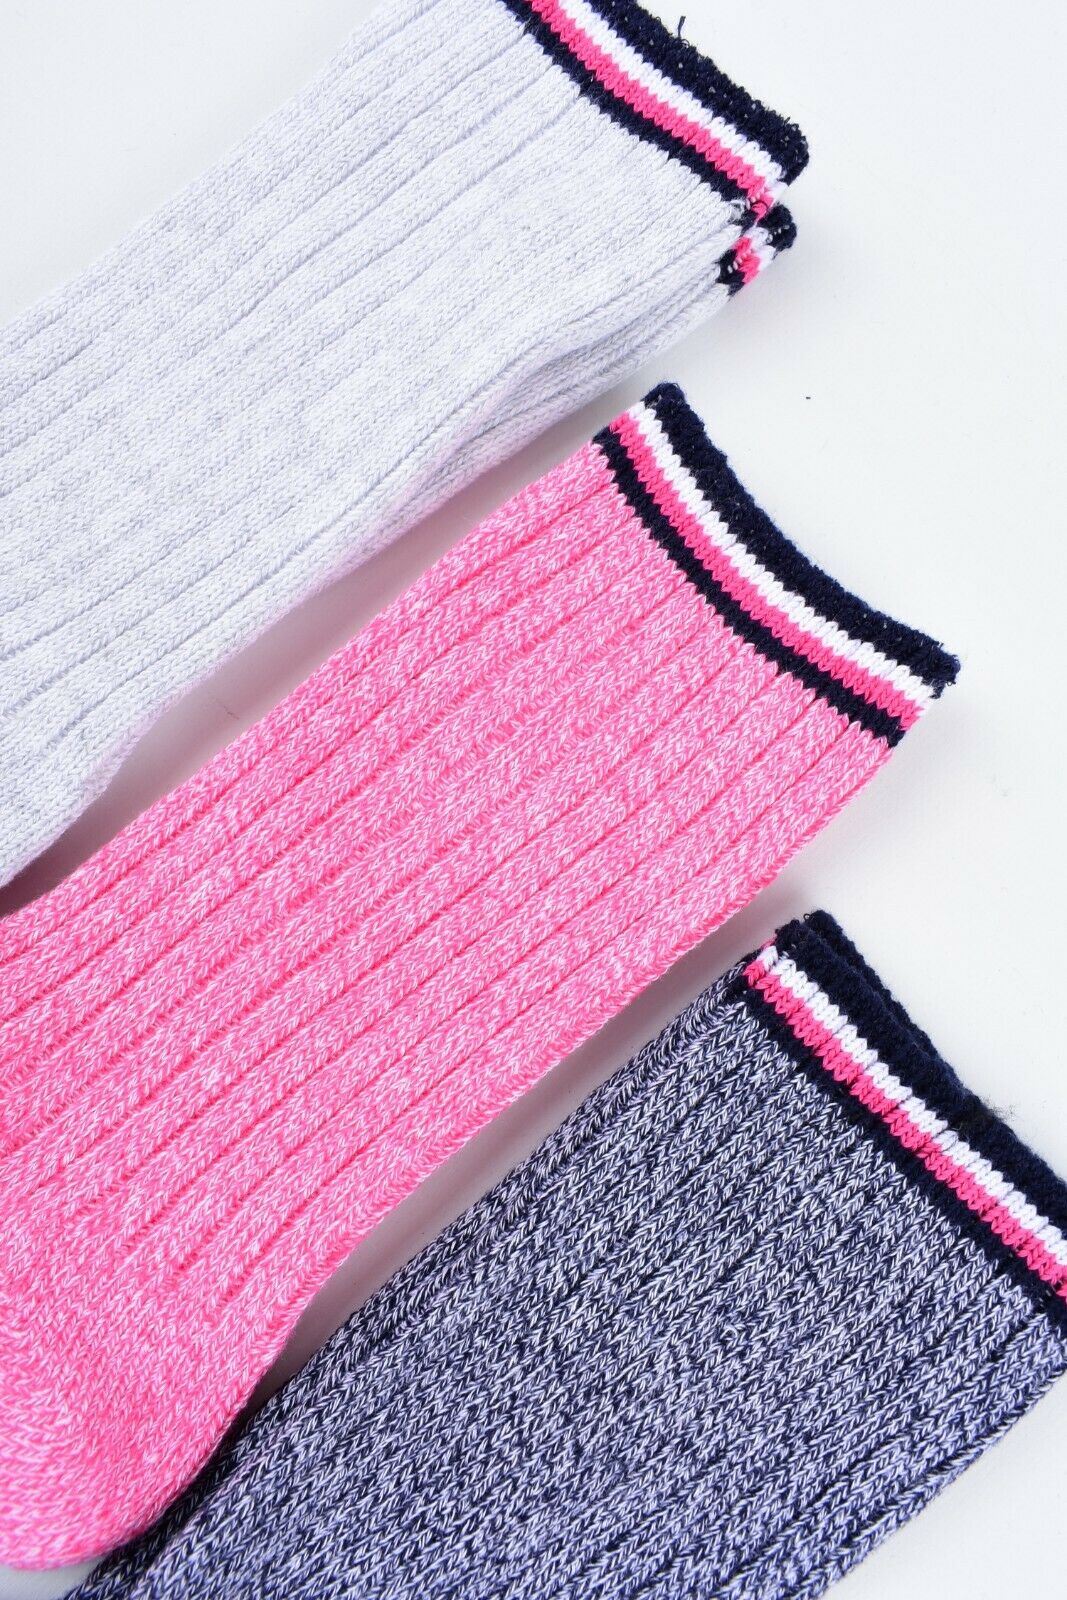 TOMMY HILFIGER 3-pack Girls' Camper Socks, Grey/Pink/Charcoal, size 4-7 years